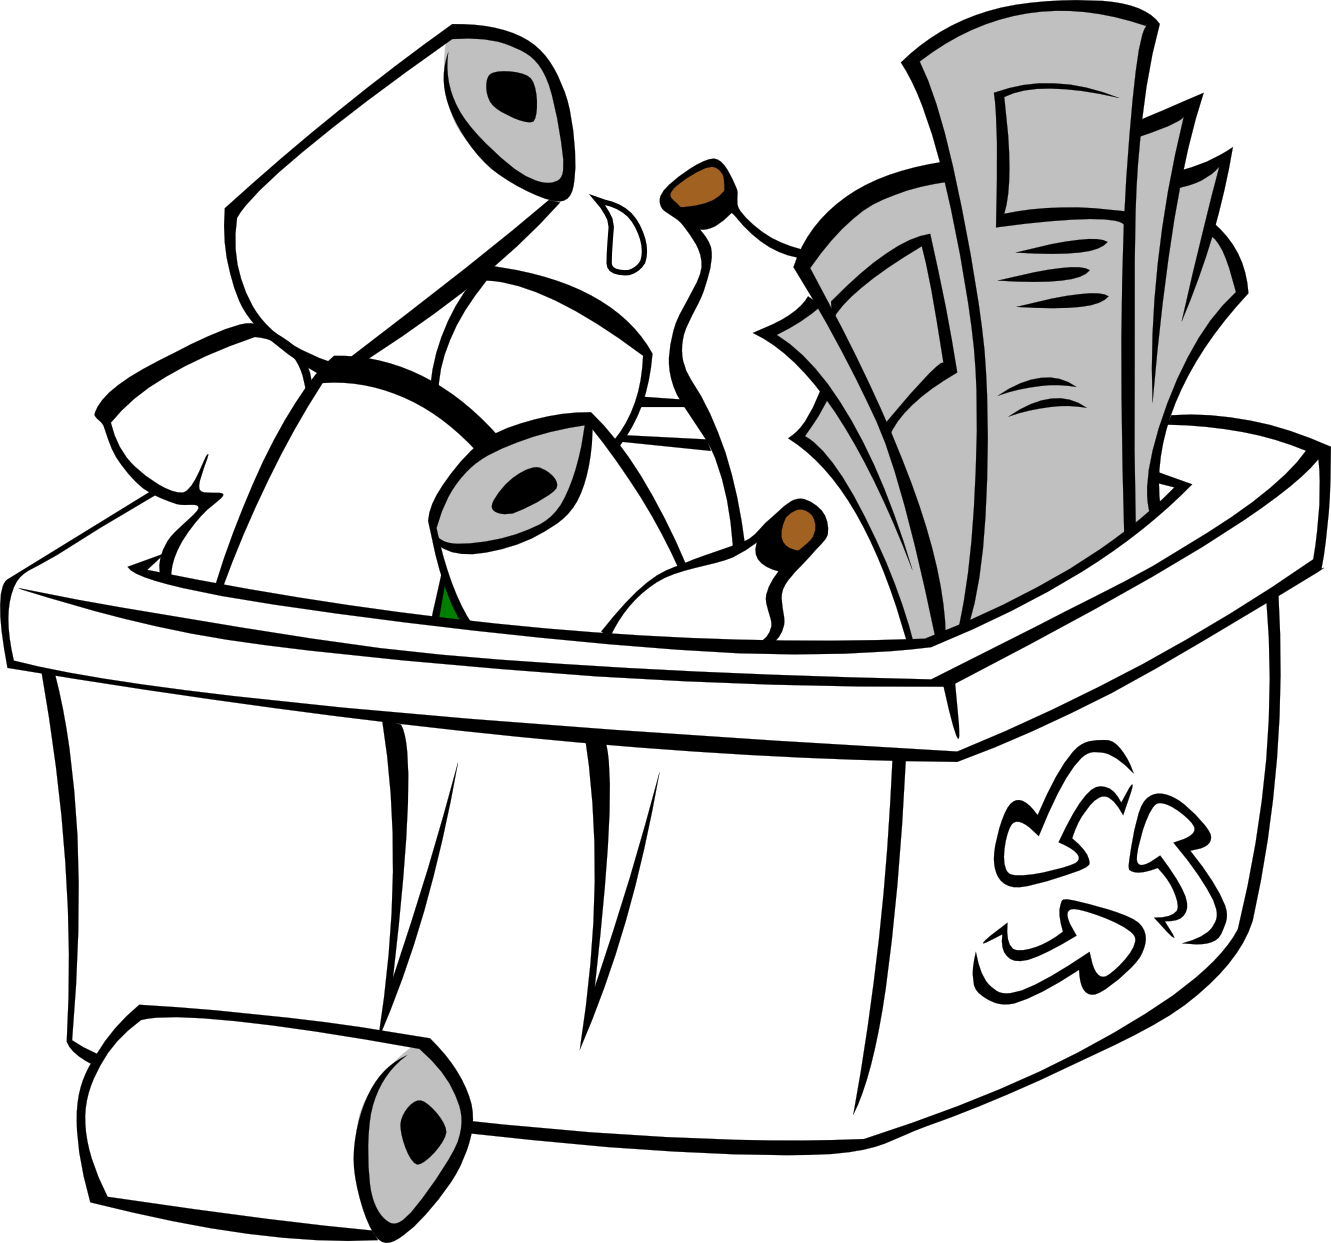 Recycle Clipart Black And White | Clipart library - Free Clipart Images